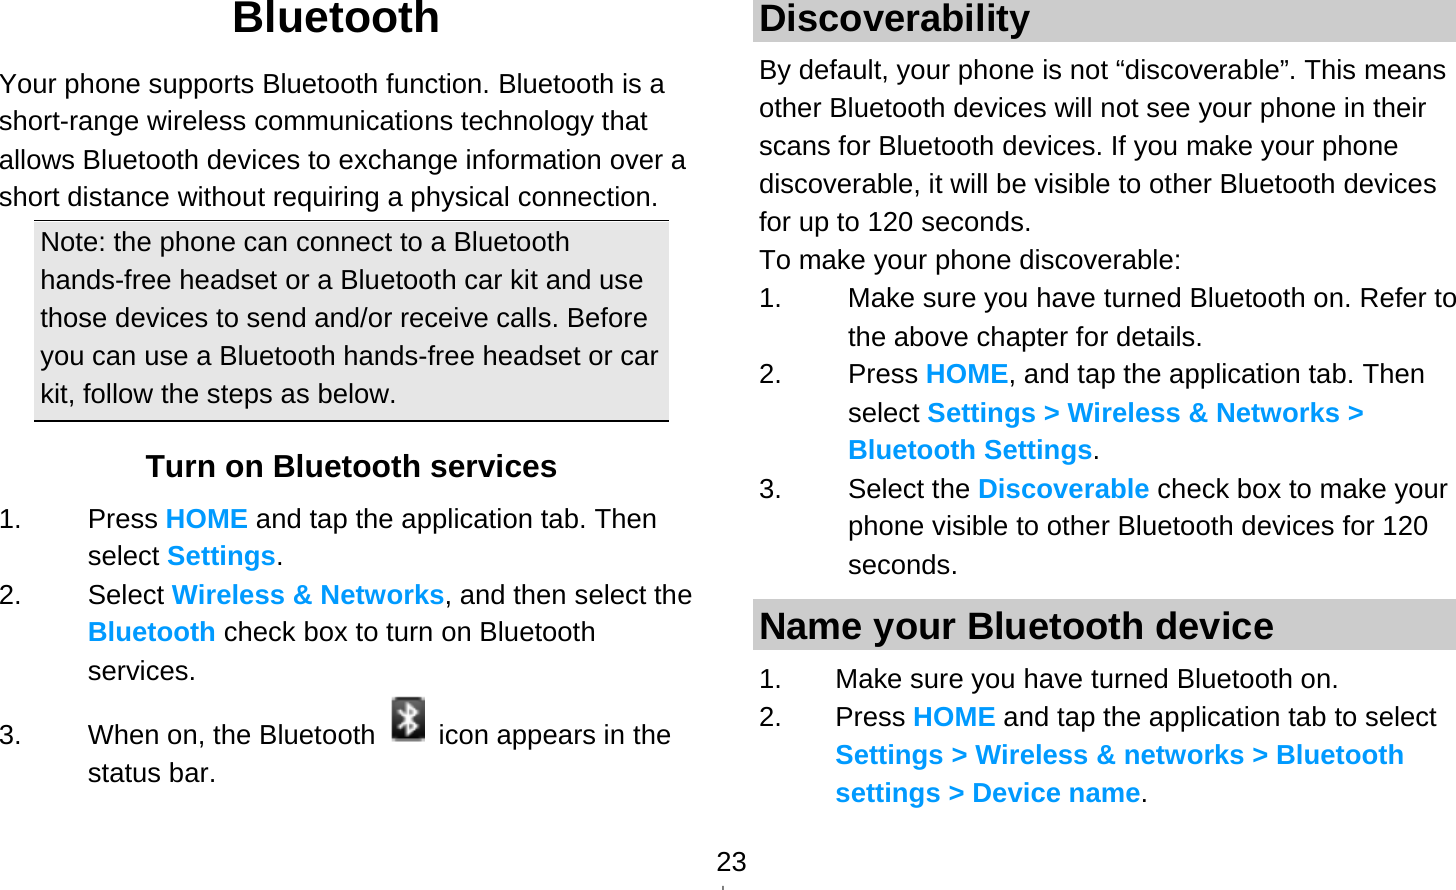   23Bluetooth Your phone supports Bluetooth function. Bluetooth is a short-range wireless communications technology that allows Bluetooth devices to exchange information over a short distance without requiring a physical connection. Note: the phone can connect to a Bluetooth hands-free headset or a Bluetooth car kit and use those devices to send and/or receive calls. Before you can use a Bluetooth hands-free headset or car kit, follow the steps as below. Turn on Bluetooth services 1. Press HOME and tap the application tab. Then select Settings. 2. Select Wireless &amp; Networks, and then select the Bluetooth check box to turn on Bluetooth services. 3.  When on, the Bluetooth    icon appears in the status bar. Discoverability By default, your phone is not “discoverable”. This means other Bluetooth devices will not see your phone in their scans for Bluetooth devices. If you make your phone discoverable, it will be visible to other Bluetooth devices for up to 120 seconds. To make your phone discoverable: 1.  Make sure you have turned Bluetooth on. Refer to the above chapter for details. 2. Press HOME, and tap the application tab. Then select Settings &gt; Wireless &amp; Networks &gt; Bluetooth Settings. 3. Select the Discoverable check box to make your phone visible to other Bluetooth devices for 120 seconds.  Name your Bluetooth device 1.  Make sure you have turned Bluetooth on. 2. Press HOME and tap the application tab to select Settings &gt; Wireless &amp; networks &gt; Bluetooth settings &gt; Device name. 